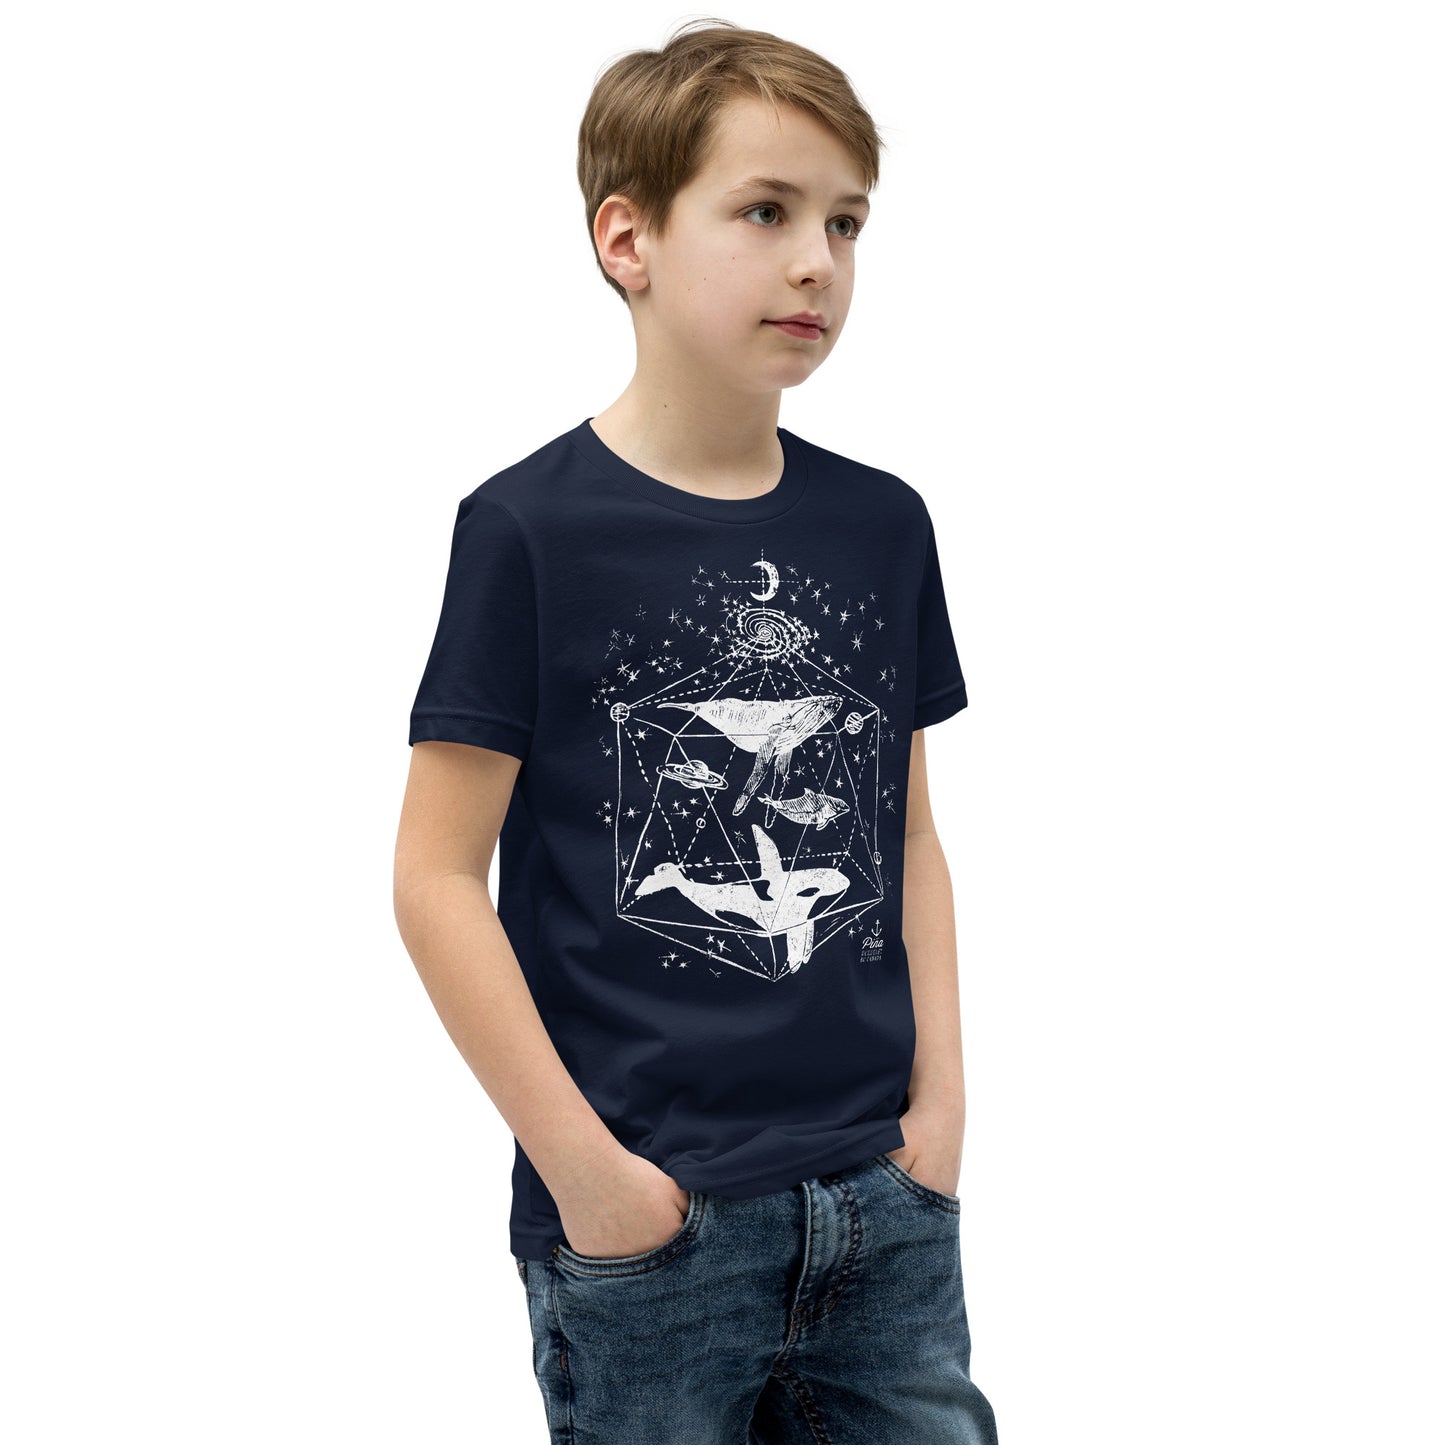 Galactic Whales Youth Tee